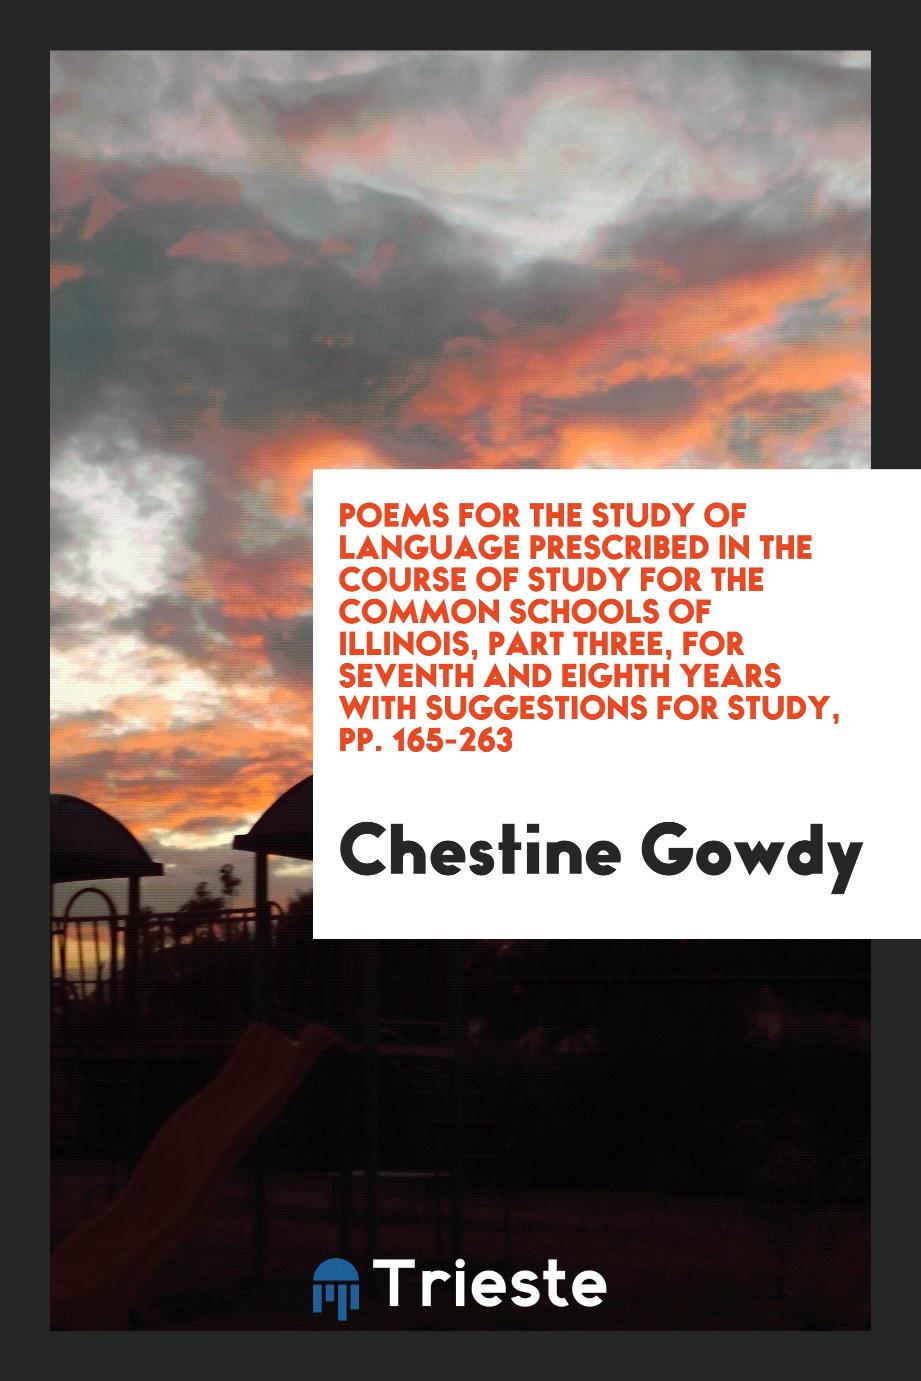 Poems for the Study of Language Prescribed in the Course of Study for the Common Schools of Illinois, Part Three, for Seventh and Eighth Years with Suggestions for Study, pp. 165-263